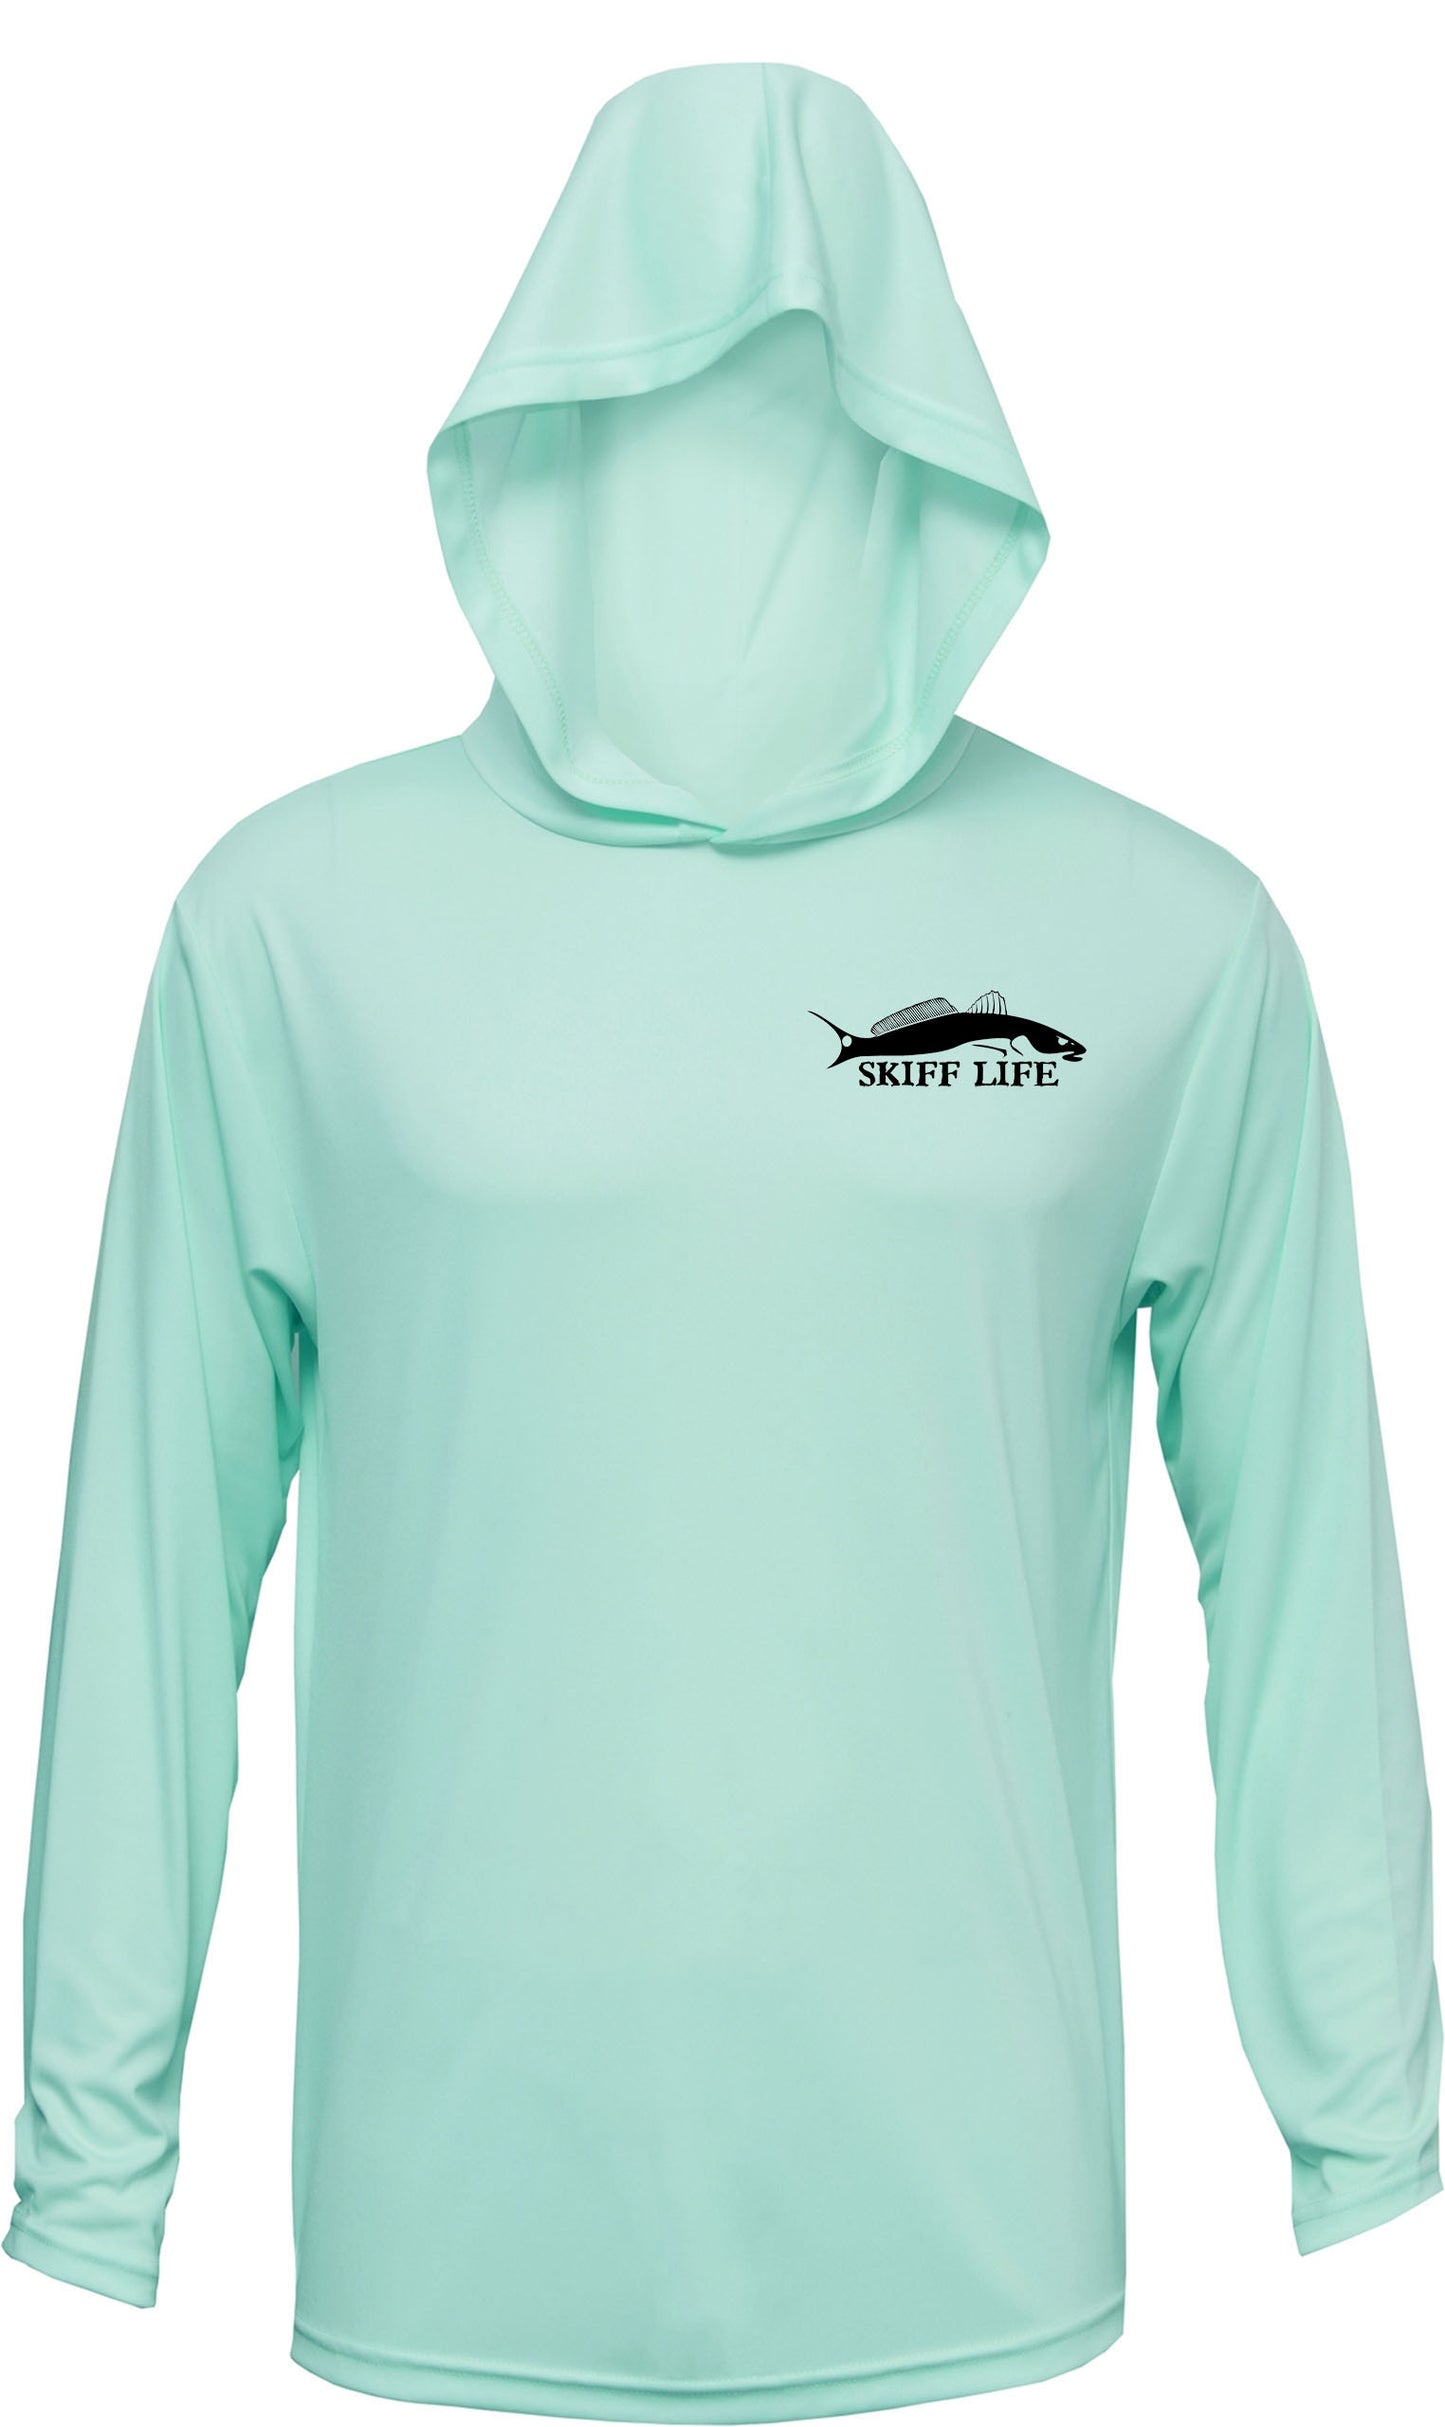 Tailing Redfish with Ripples Hoodie - UV Protected +50 Sun Protection with Moisture Wicking Technology by Skiff Life - Skiff Life